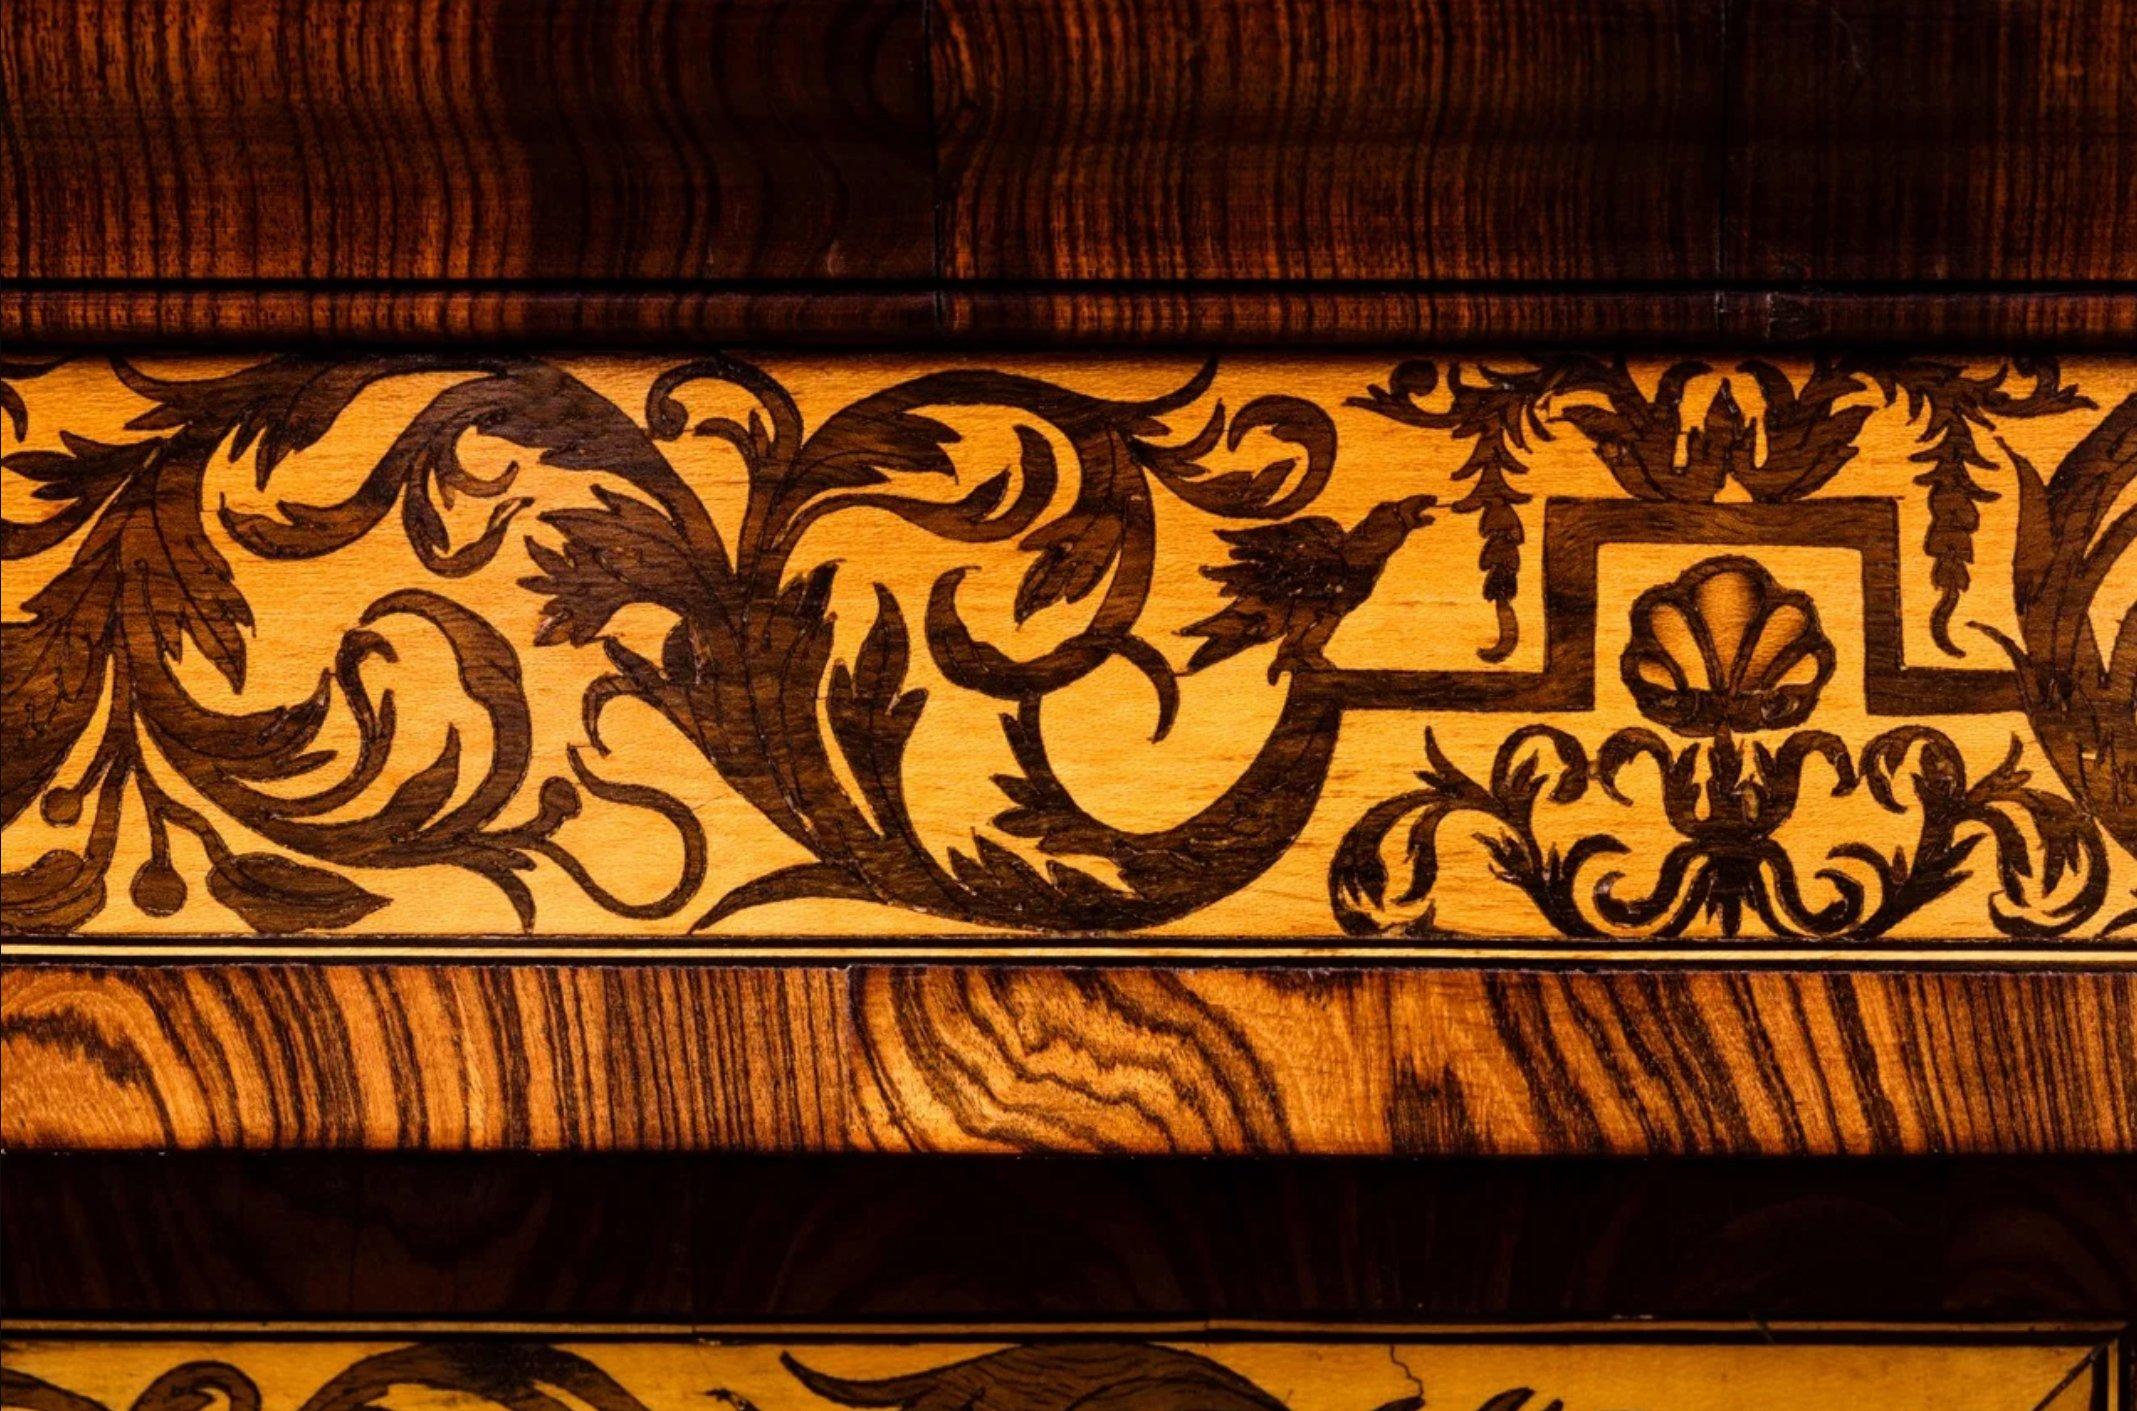 A magnificent Dutch marquetry cabinet on stand, by Jan van Mekeren (1658-1733) possibly made for William III and Mary of England

Amsterdam, circa 1687

The oak cabinet is decorated with 'arabesque' or 'seaweed' marquetry in Turkish walnut (Juglans